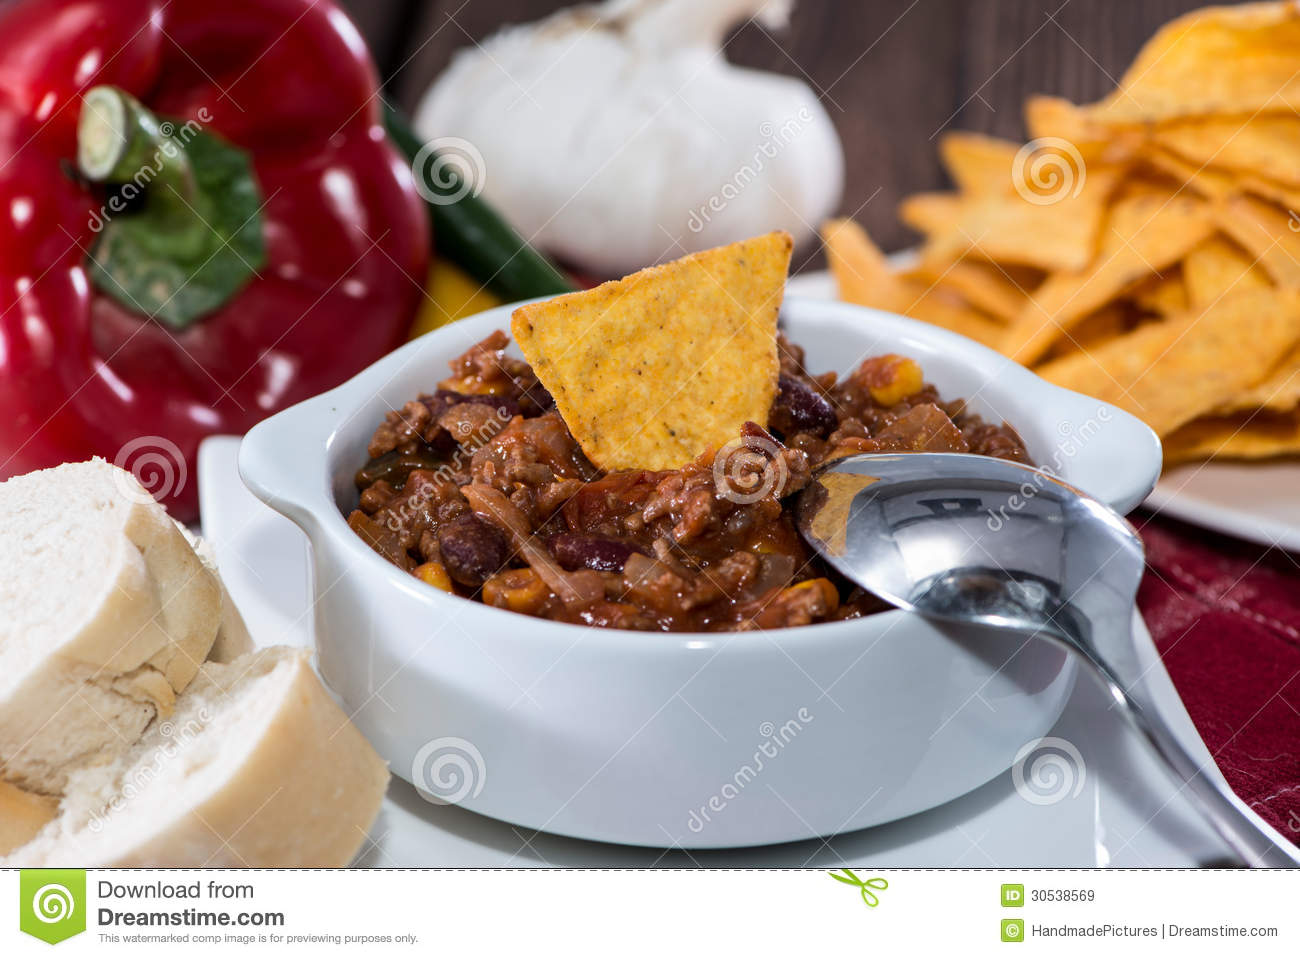 Homemade Chili Con Carne Royalty Free Stock Images   Image  30538569